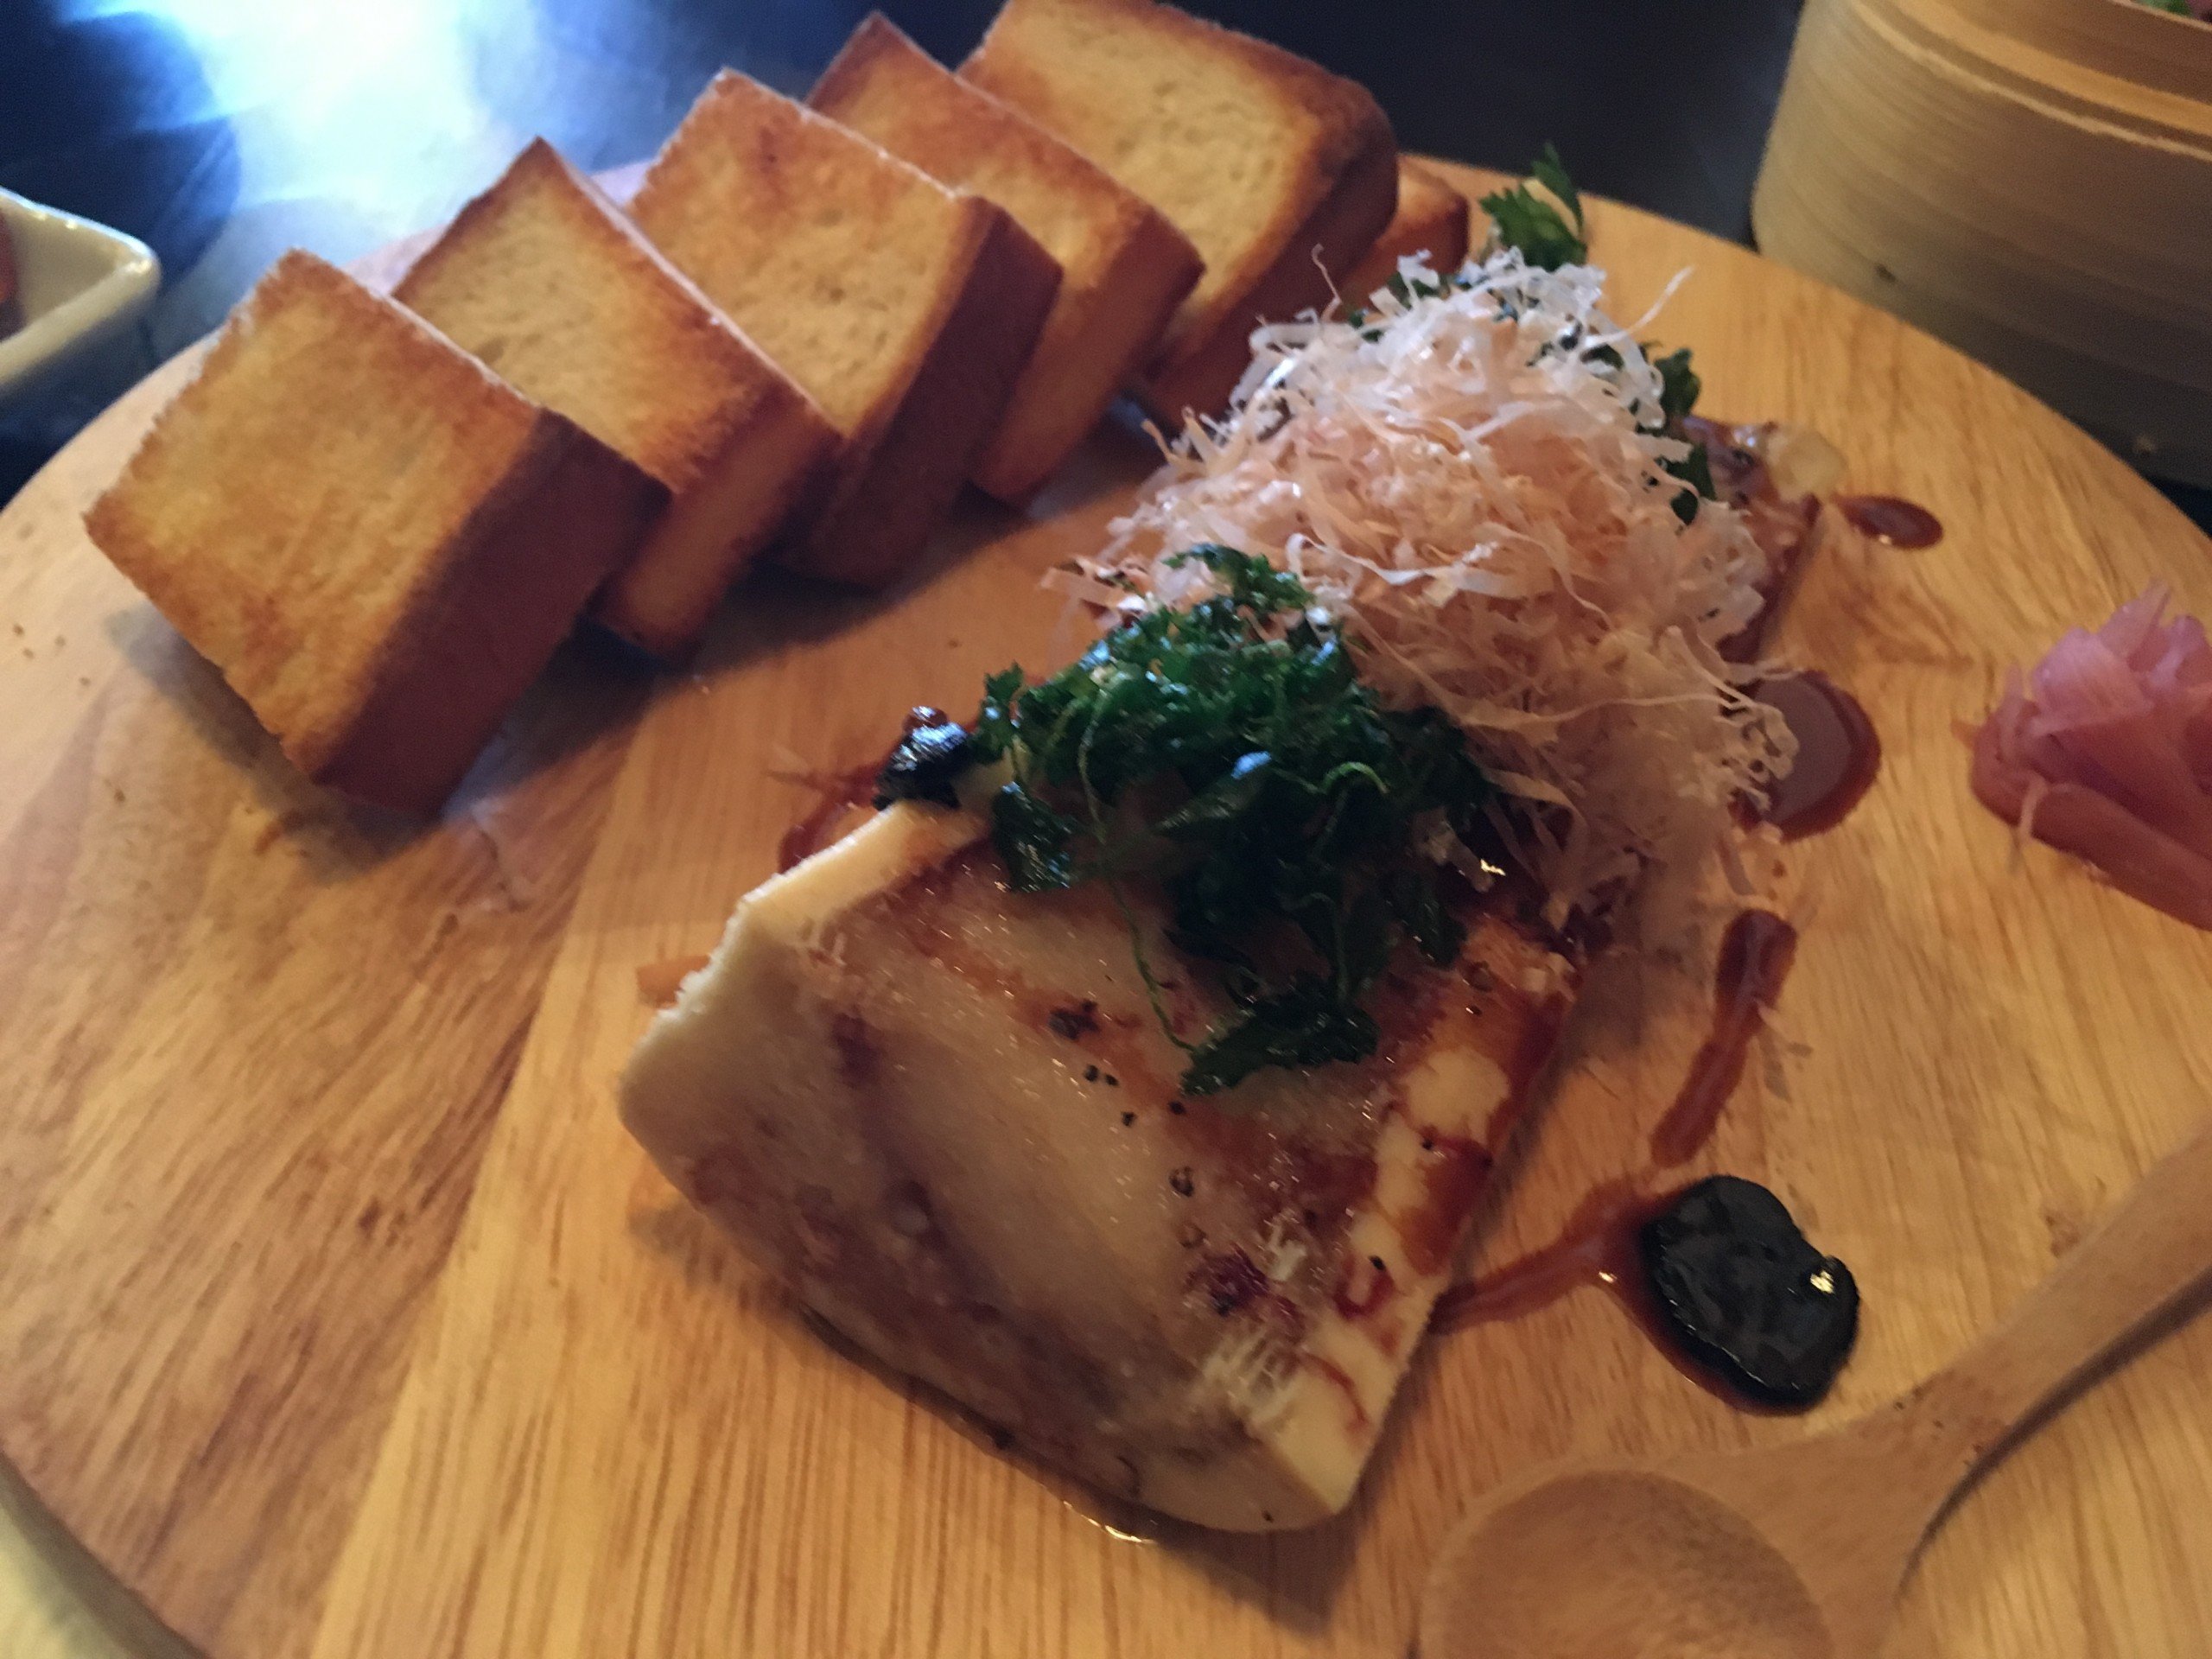 The wifey is a marrow maniac so of course we had to order this. Inyo's version is mixed with truffle miso, shaved bonito and fried herbs and served with Japanese milk toast. ($10.99)